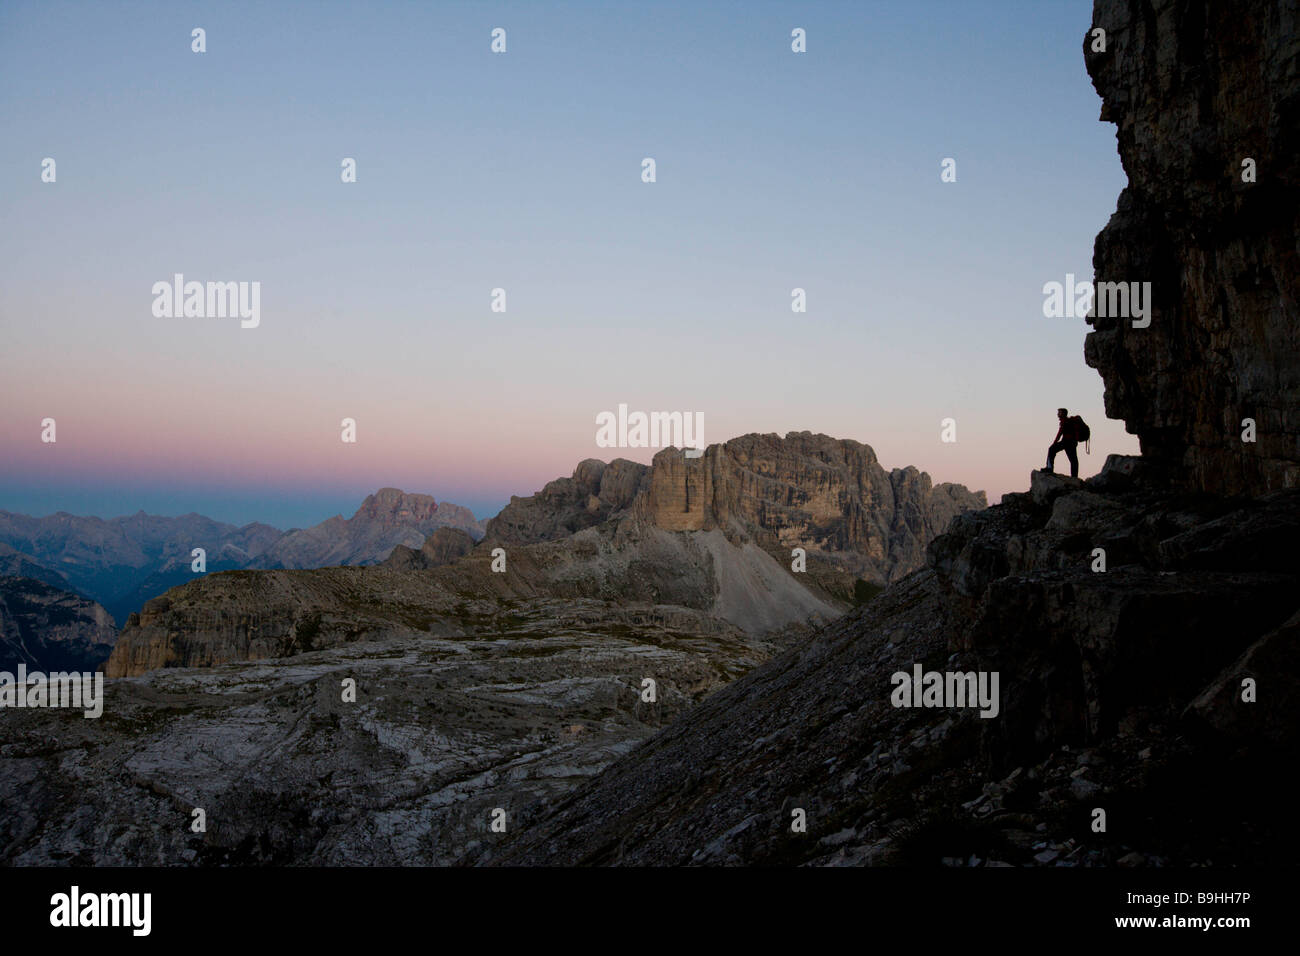 Man standing at flank of a mountain Stock Photo